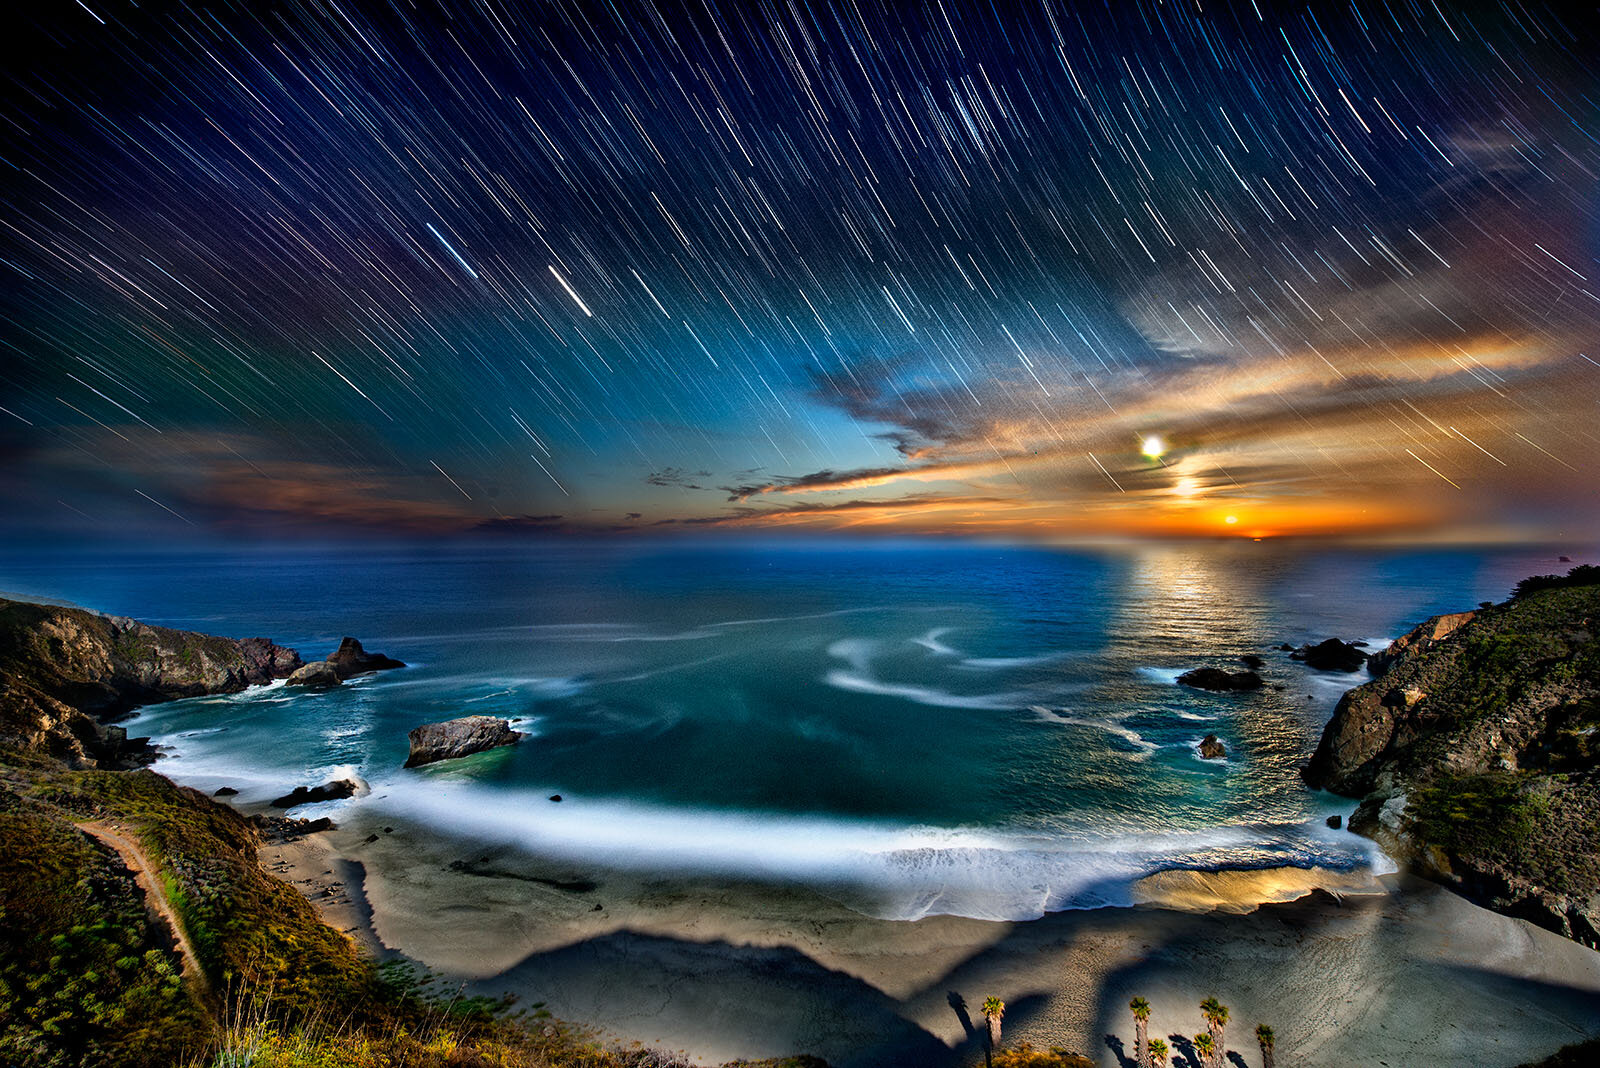 Four Suns overBig Sur, Pacific Coast Day and Night Timescape, ne